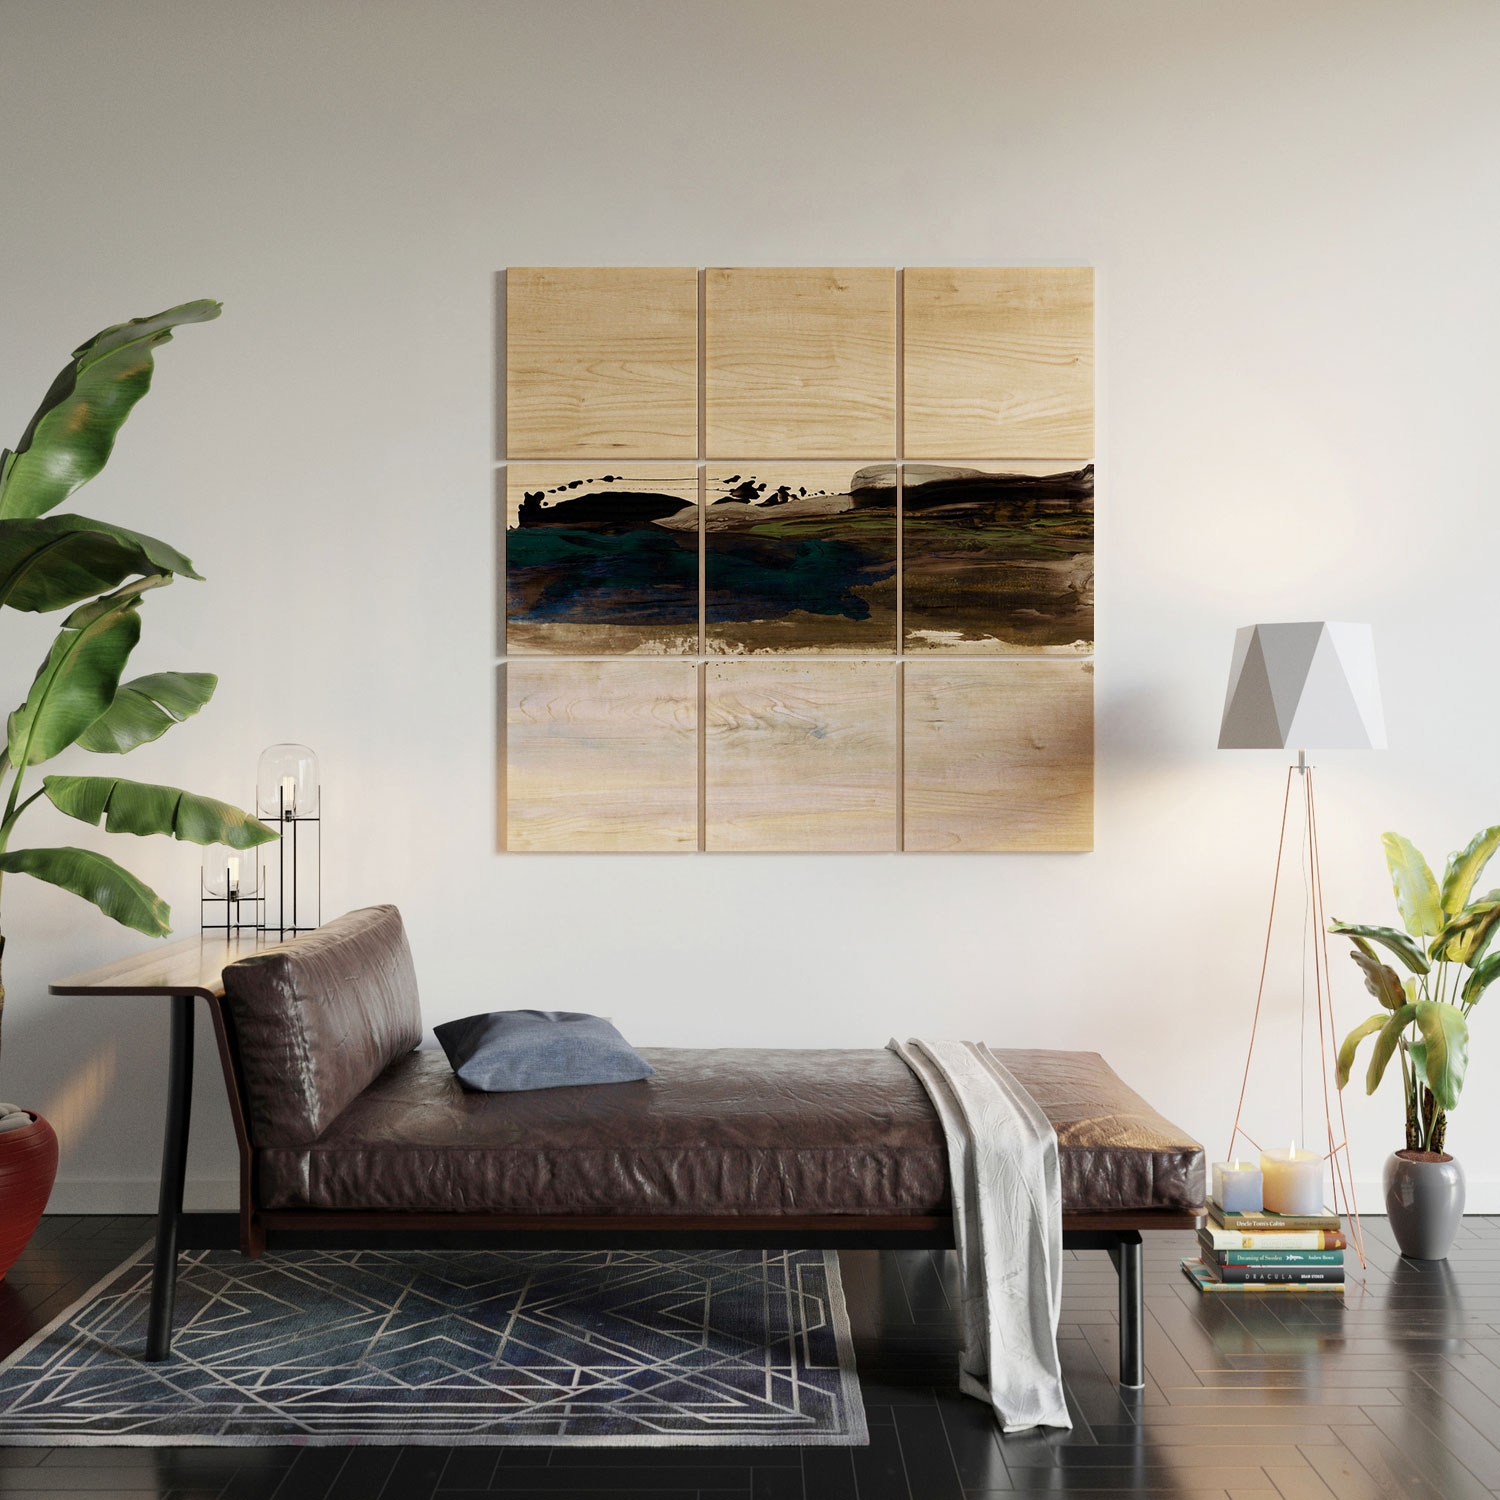 Soulscape 02 by Iris Lehnhardt - Wood Wall Mural5' x 5' (Nine 20" wood Squares) - Image 0